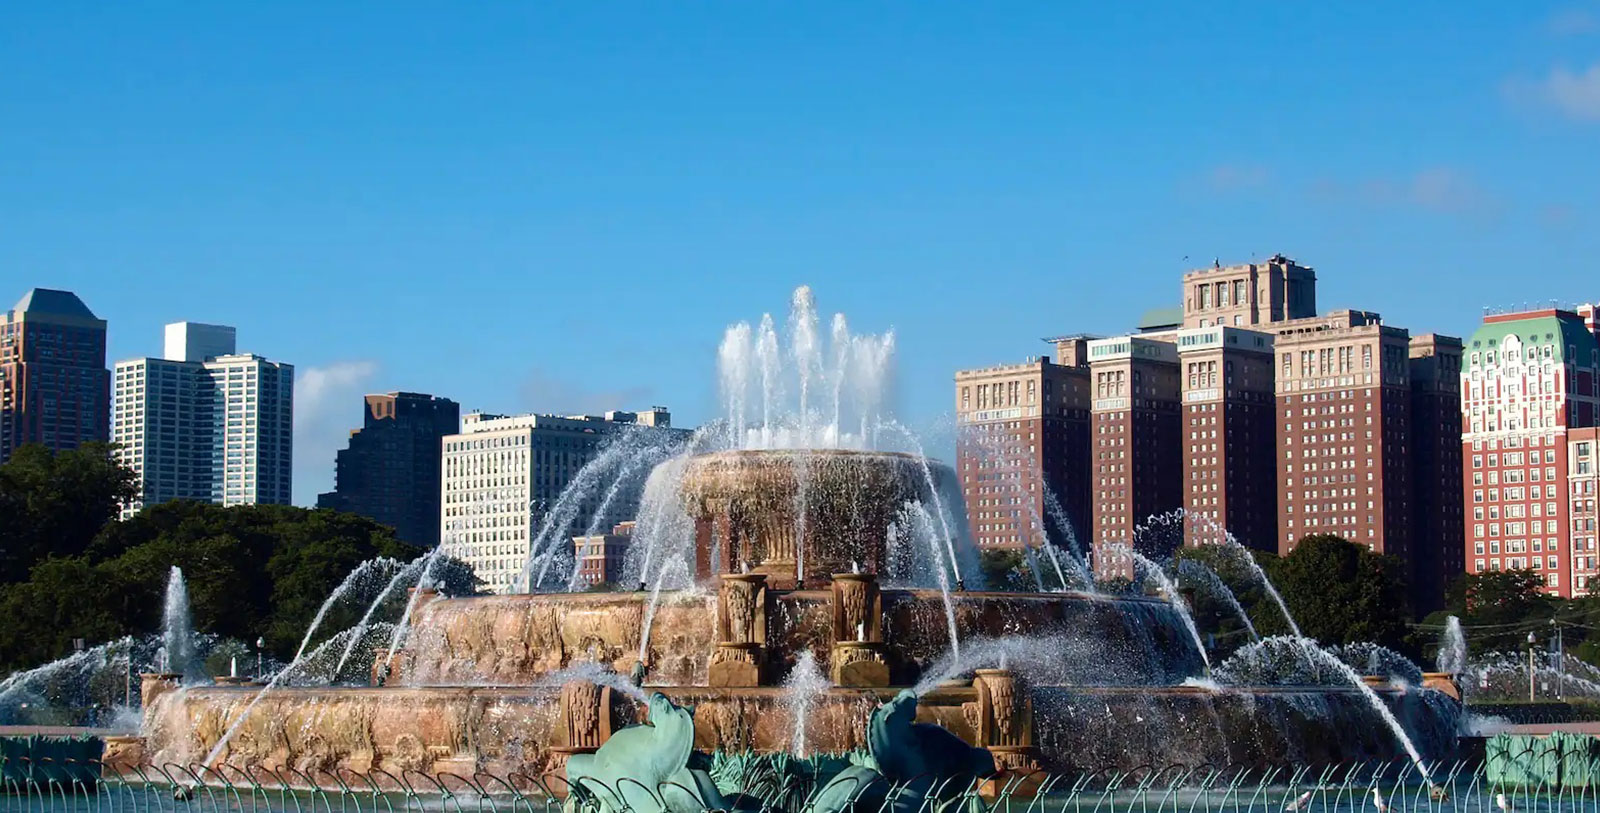 Explore Grant Park and see the iconic Buckingham Fountain right across the street from the hotel.